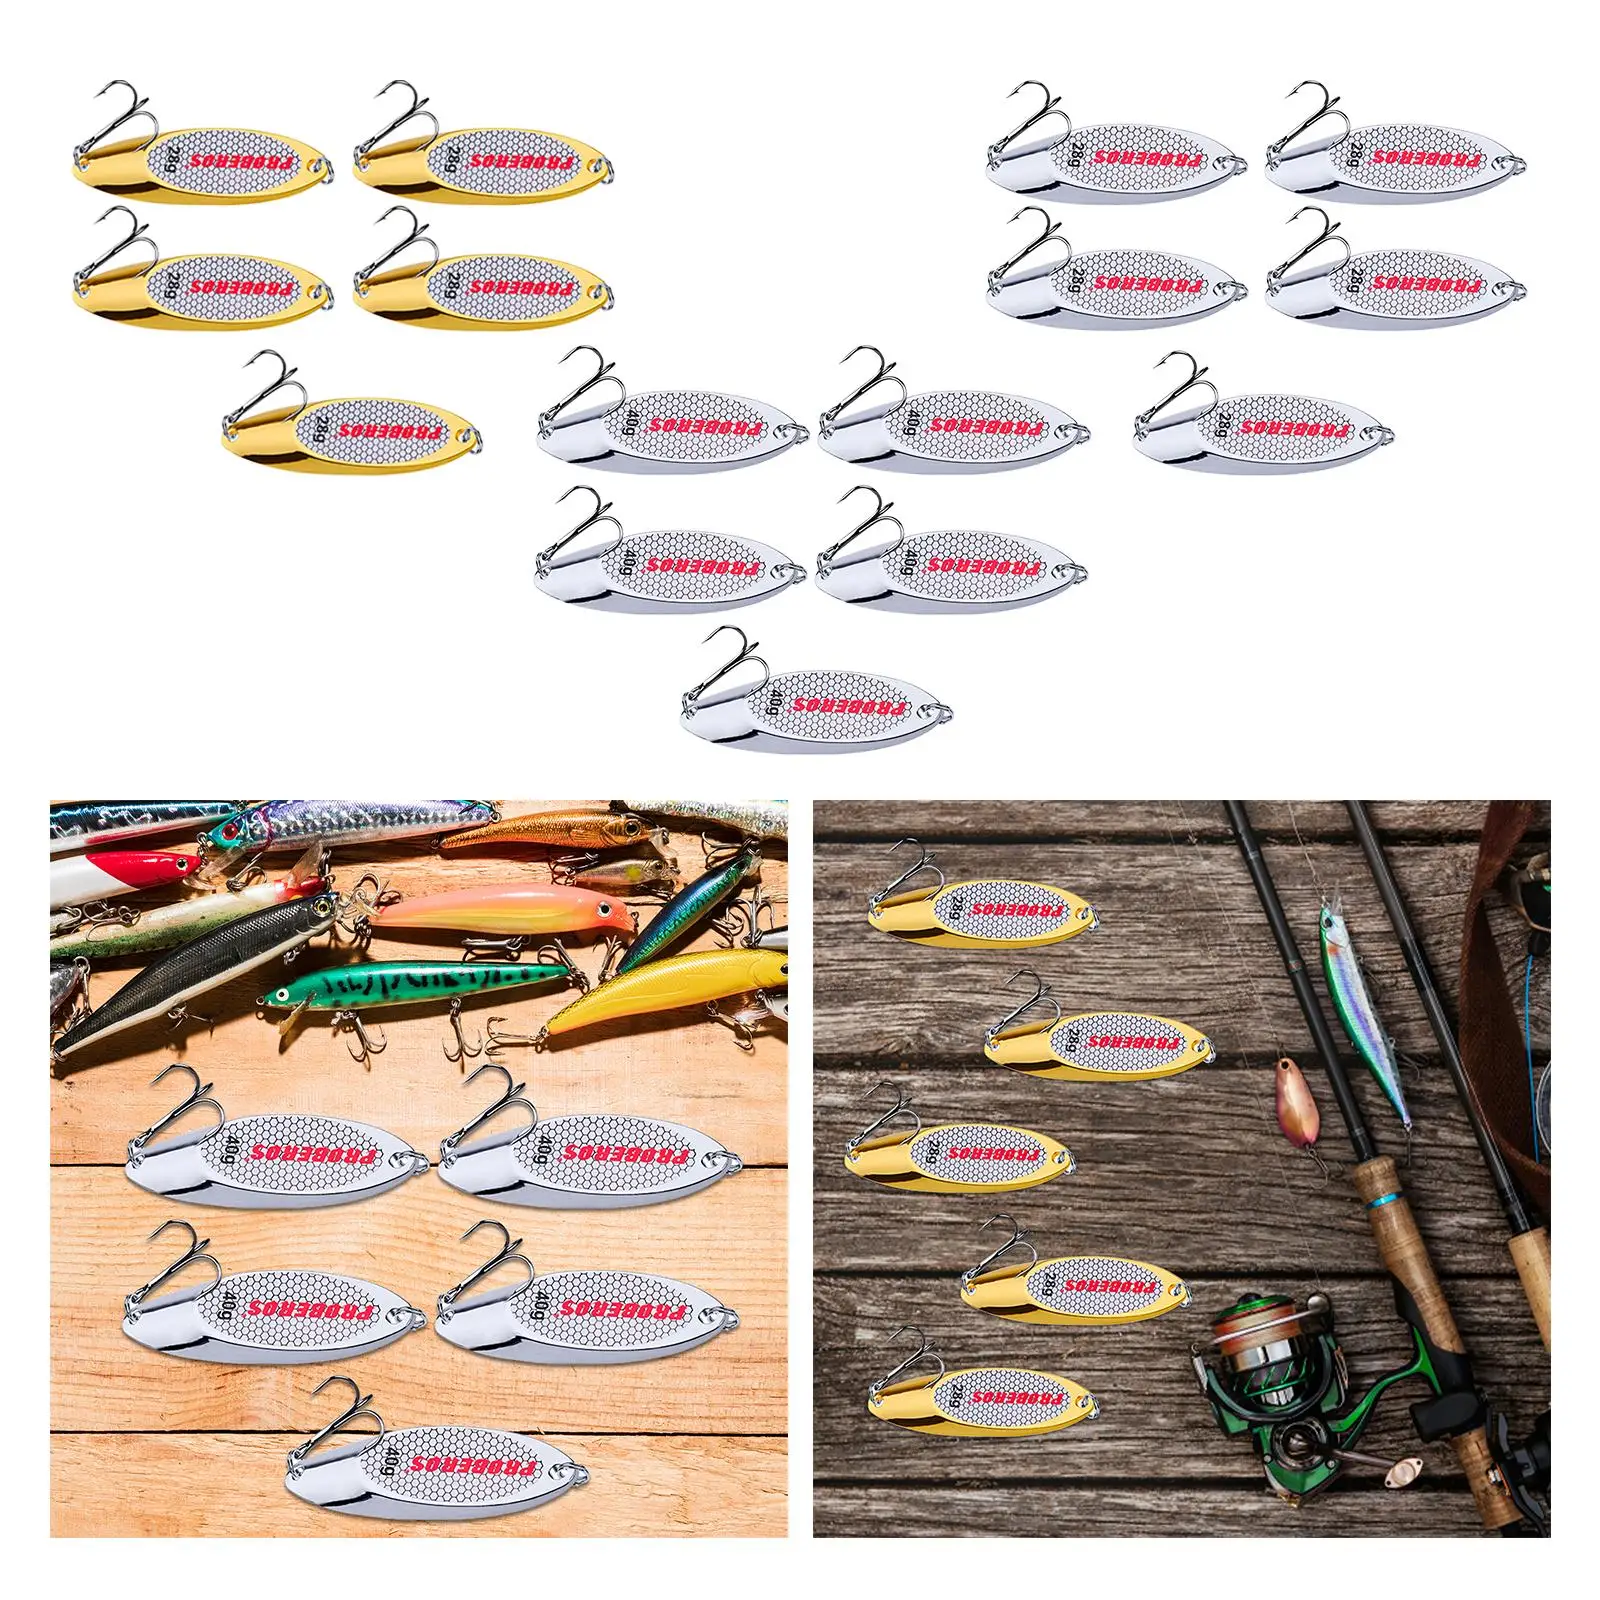 5x Fishing Spoons Hard Metal Fishing Baits for Huge Distance Cast Saltwater